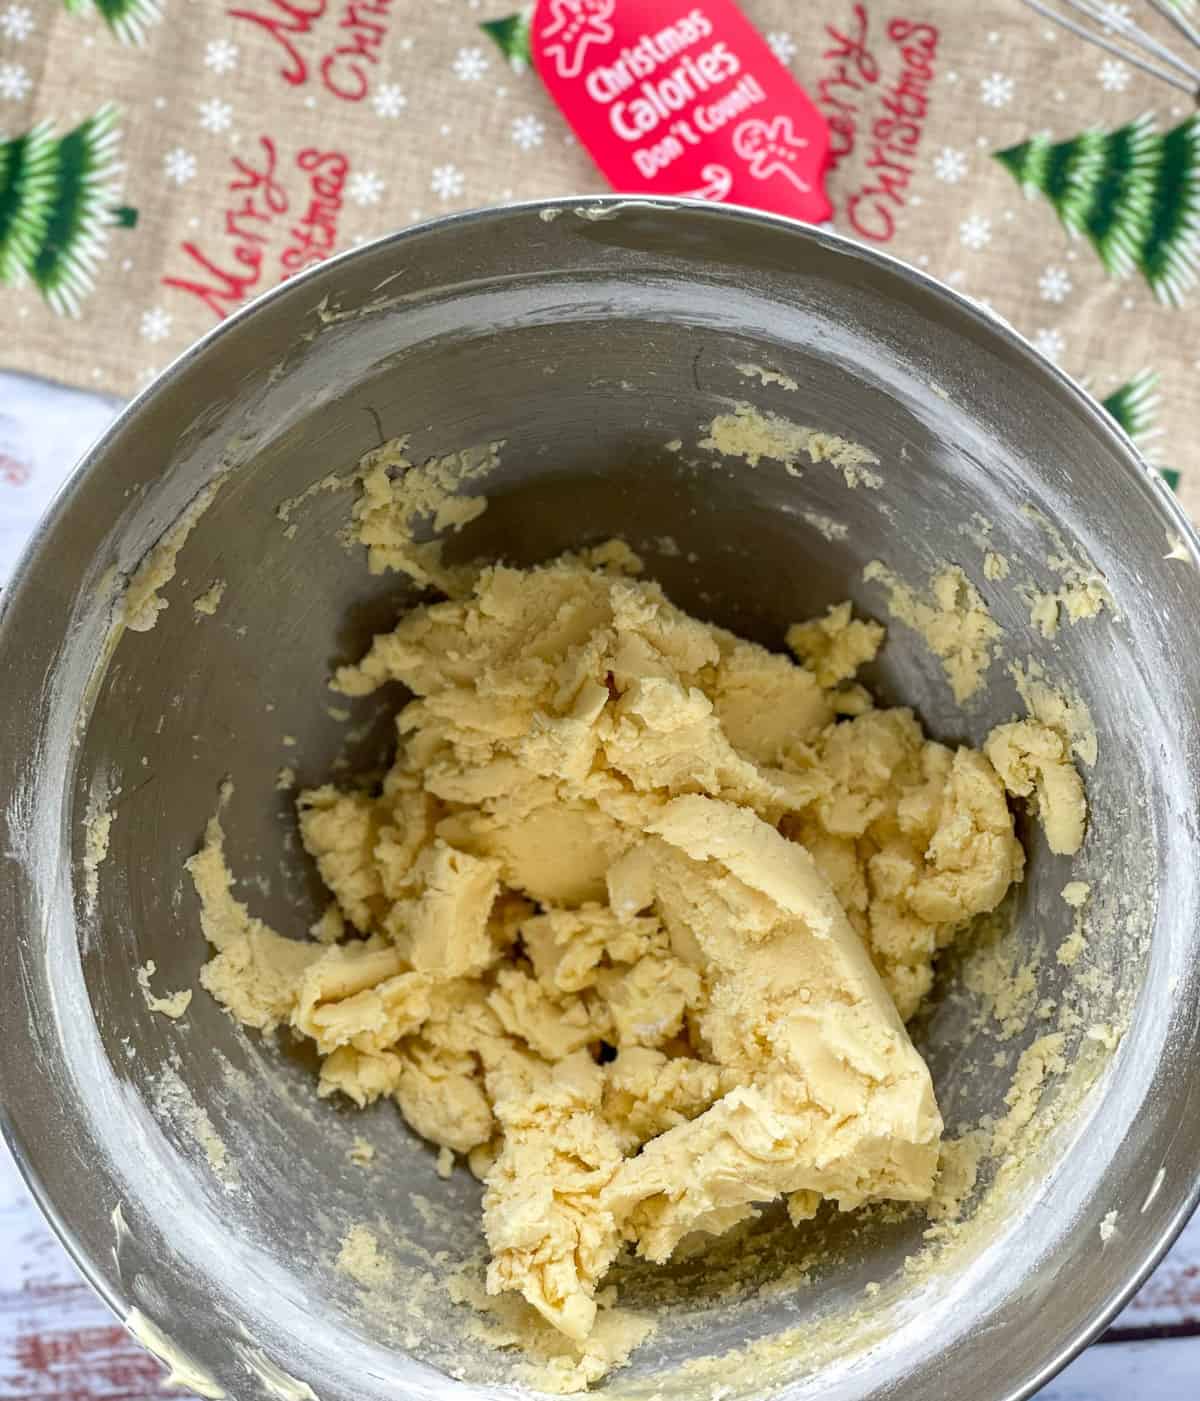 Bring the shortbread mix together to form a dough 